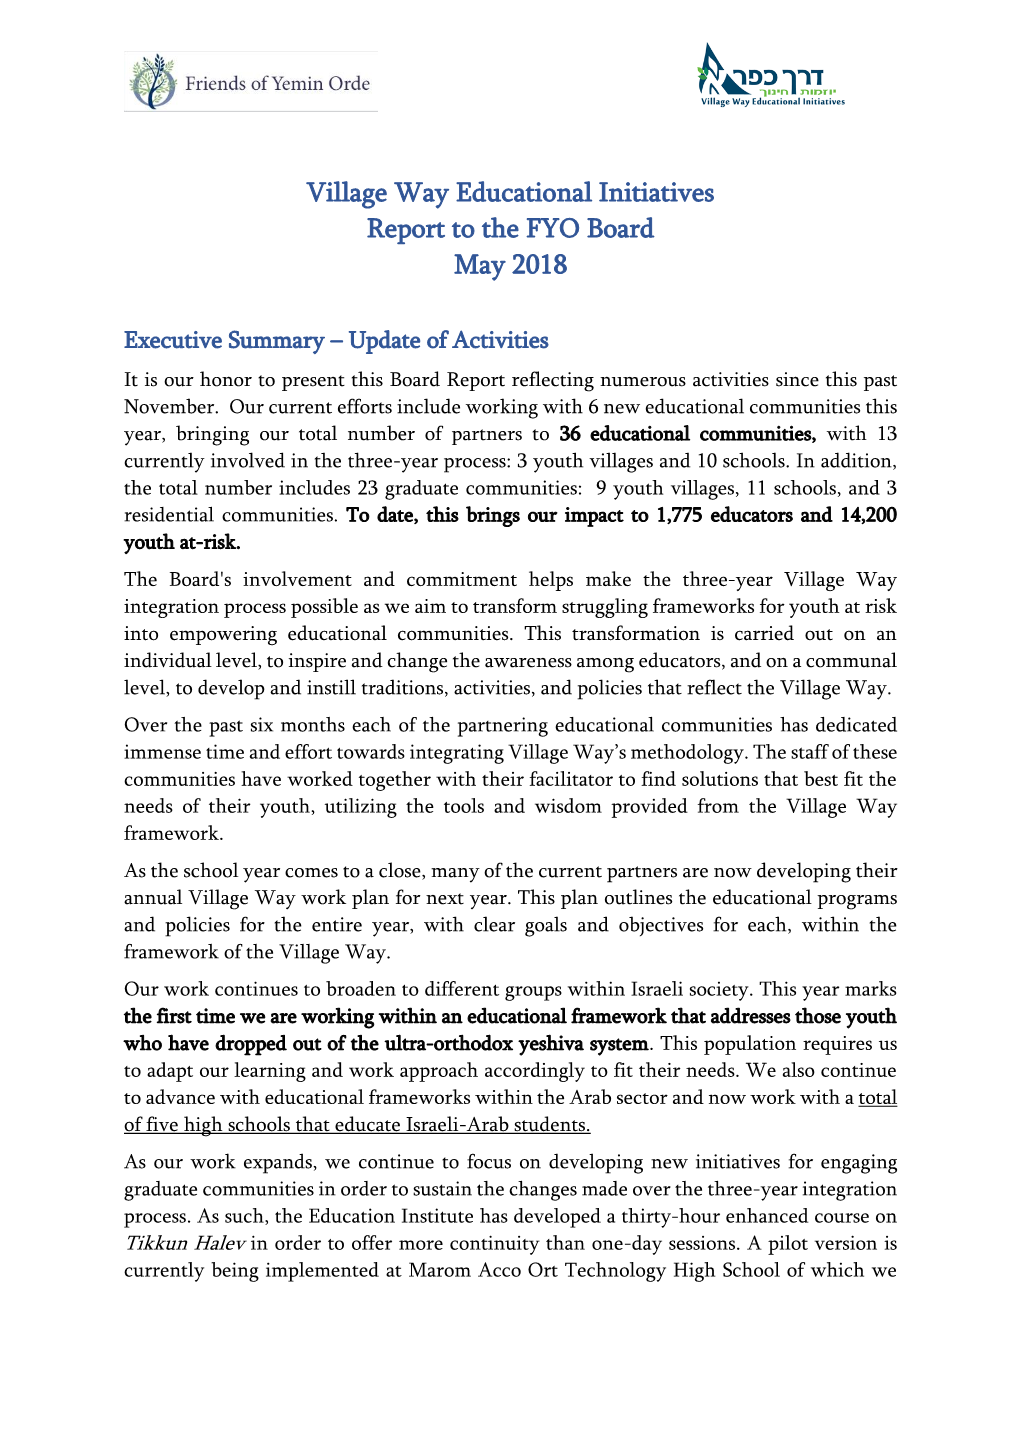 Village Way Educational Initiatives Report to the FYO Board May 2018